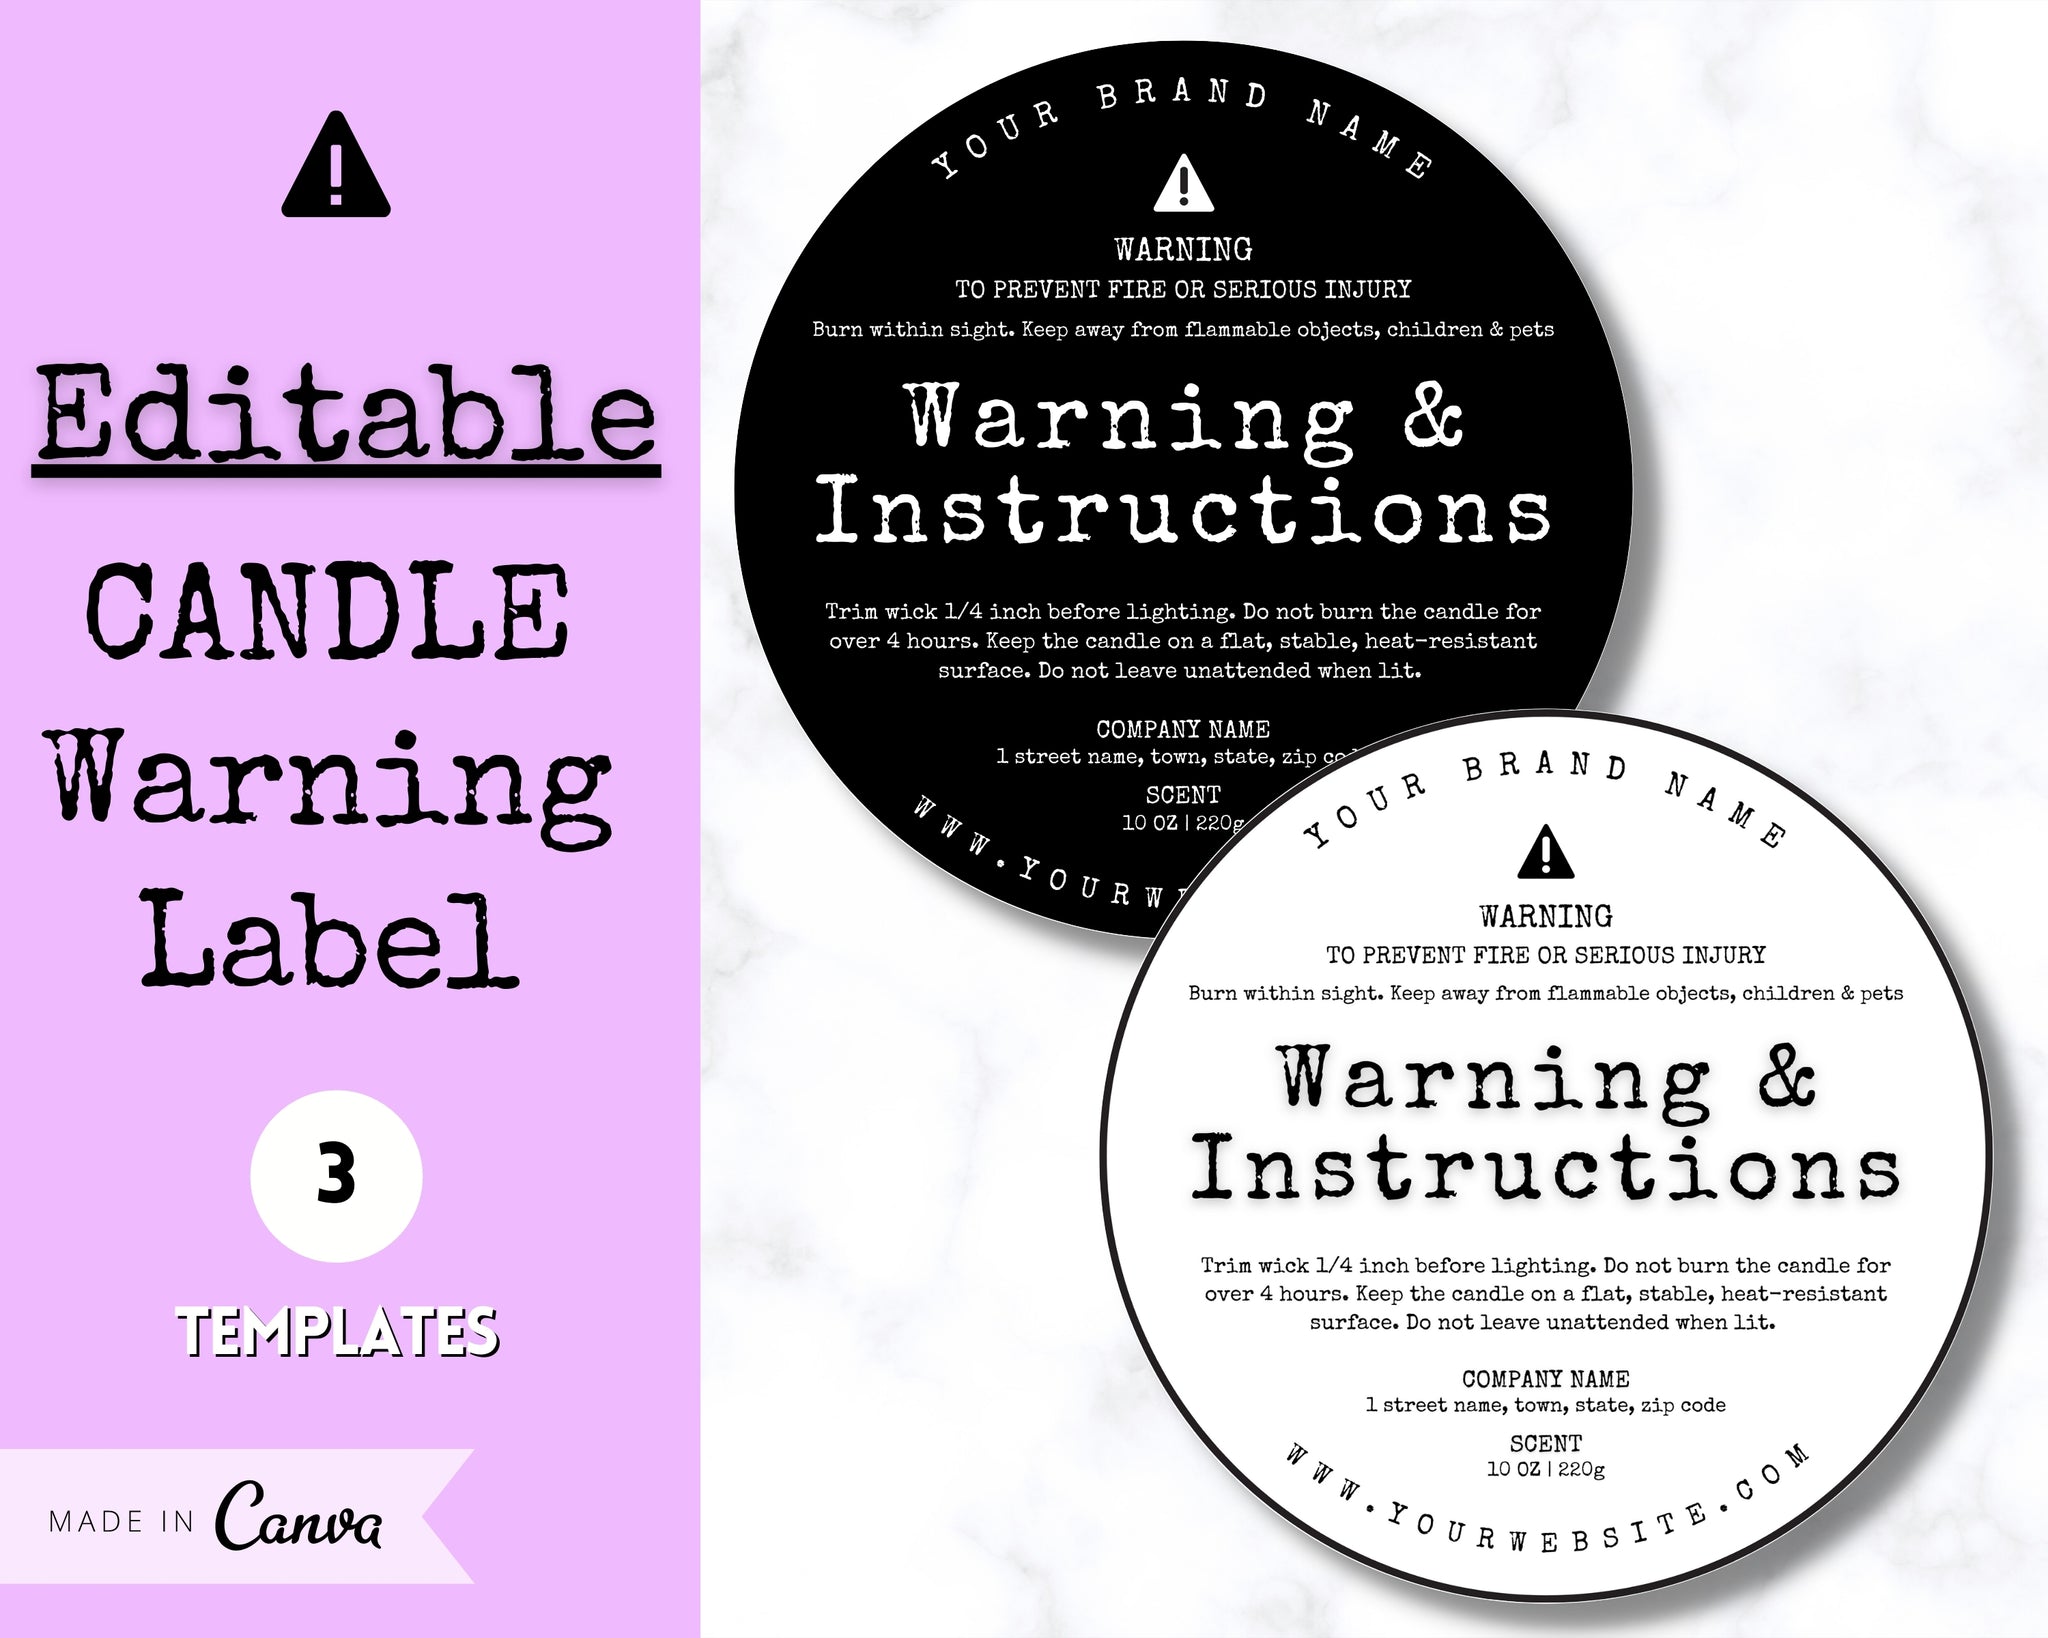 EDITABLE Candle Warning Label Template